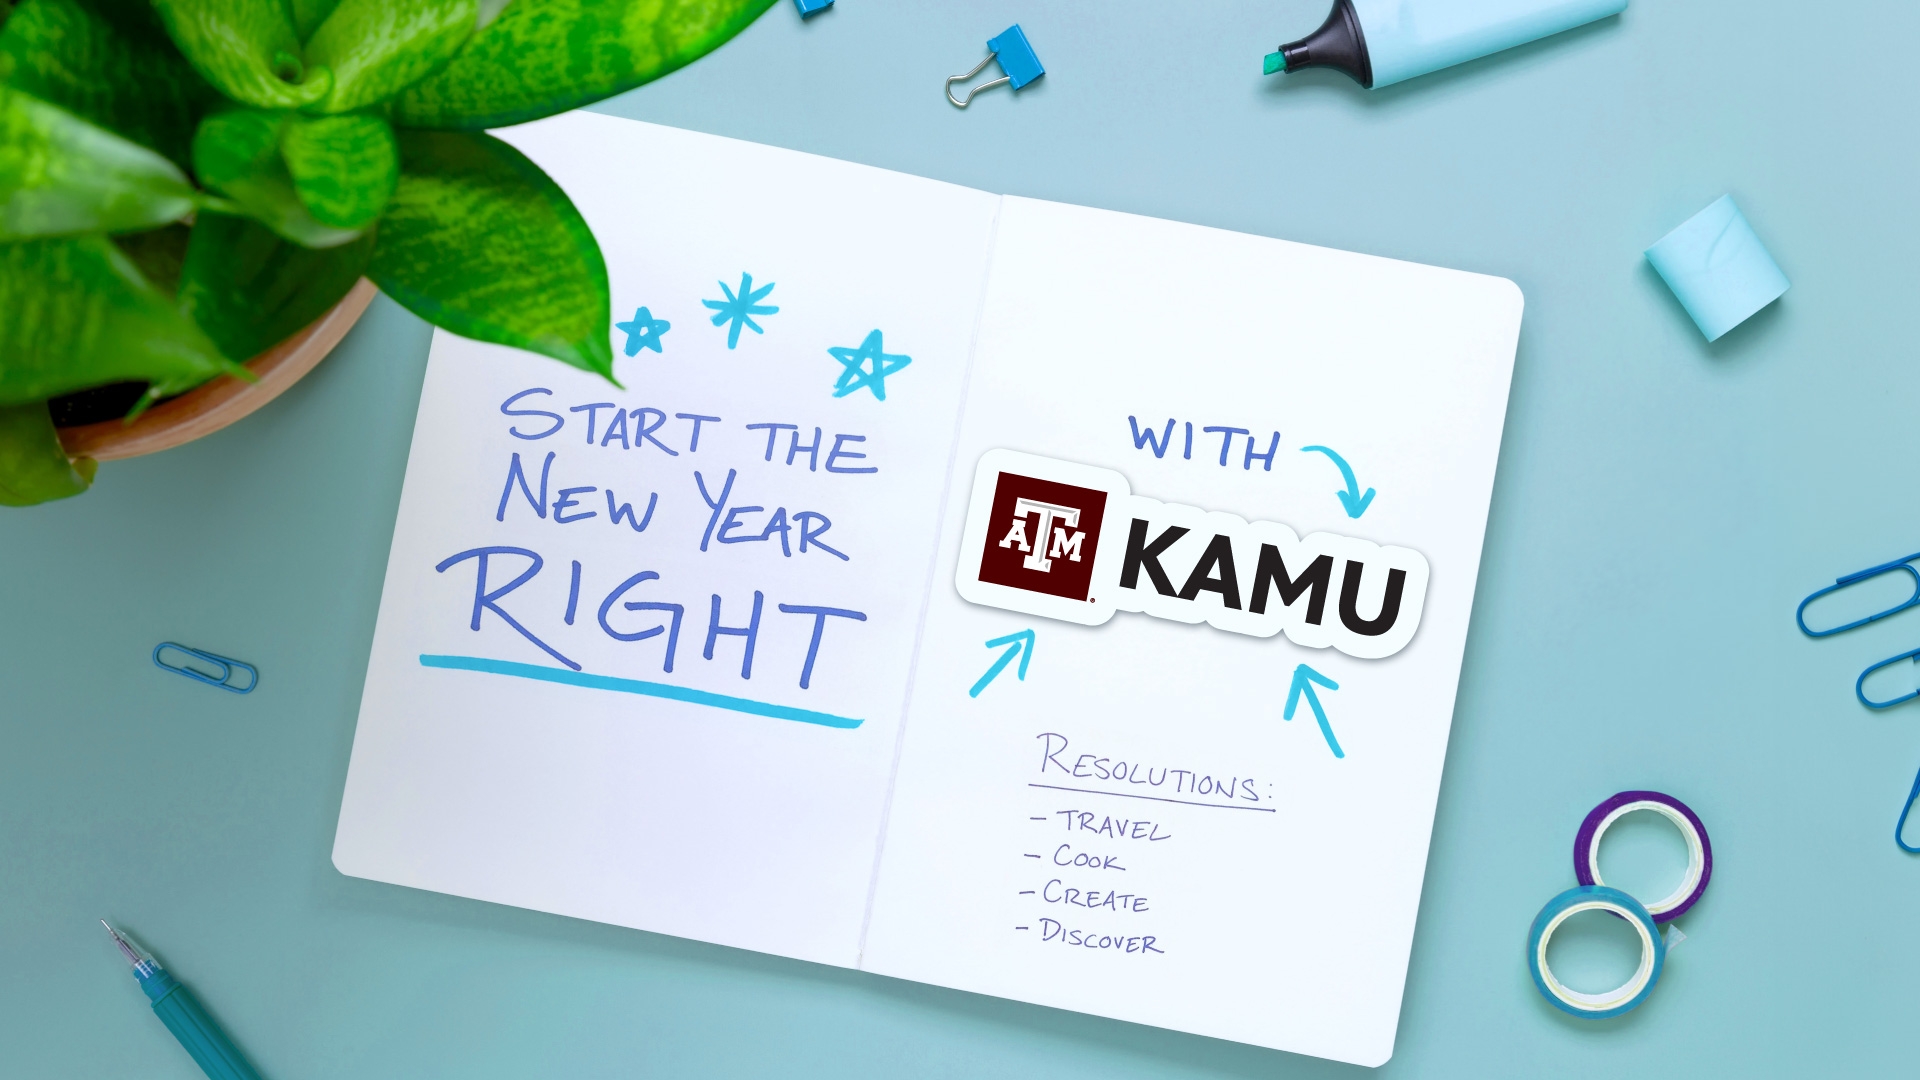 Start the New Year right with KAMU.